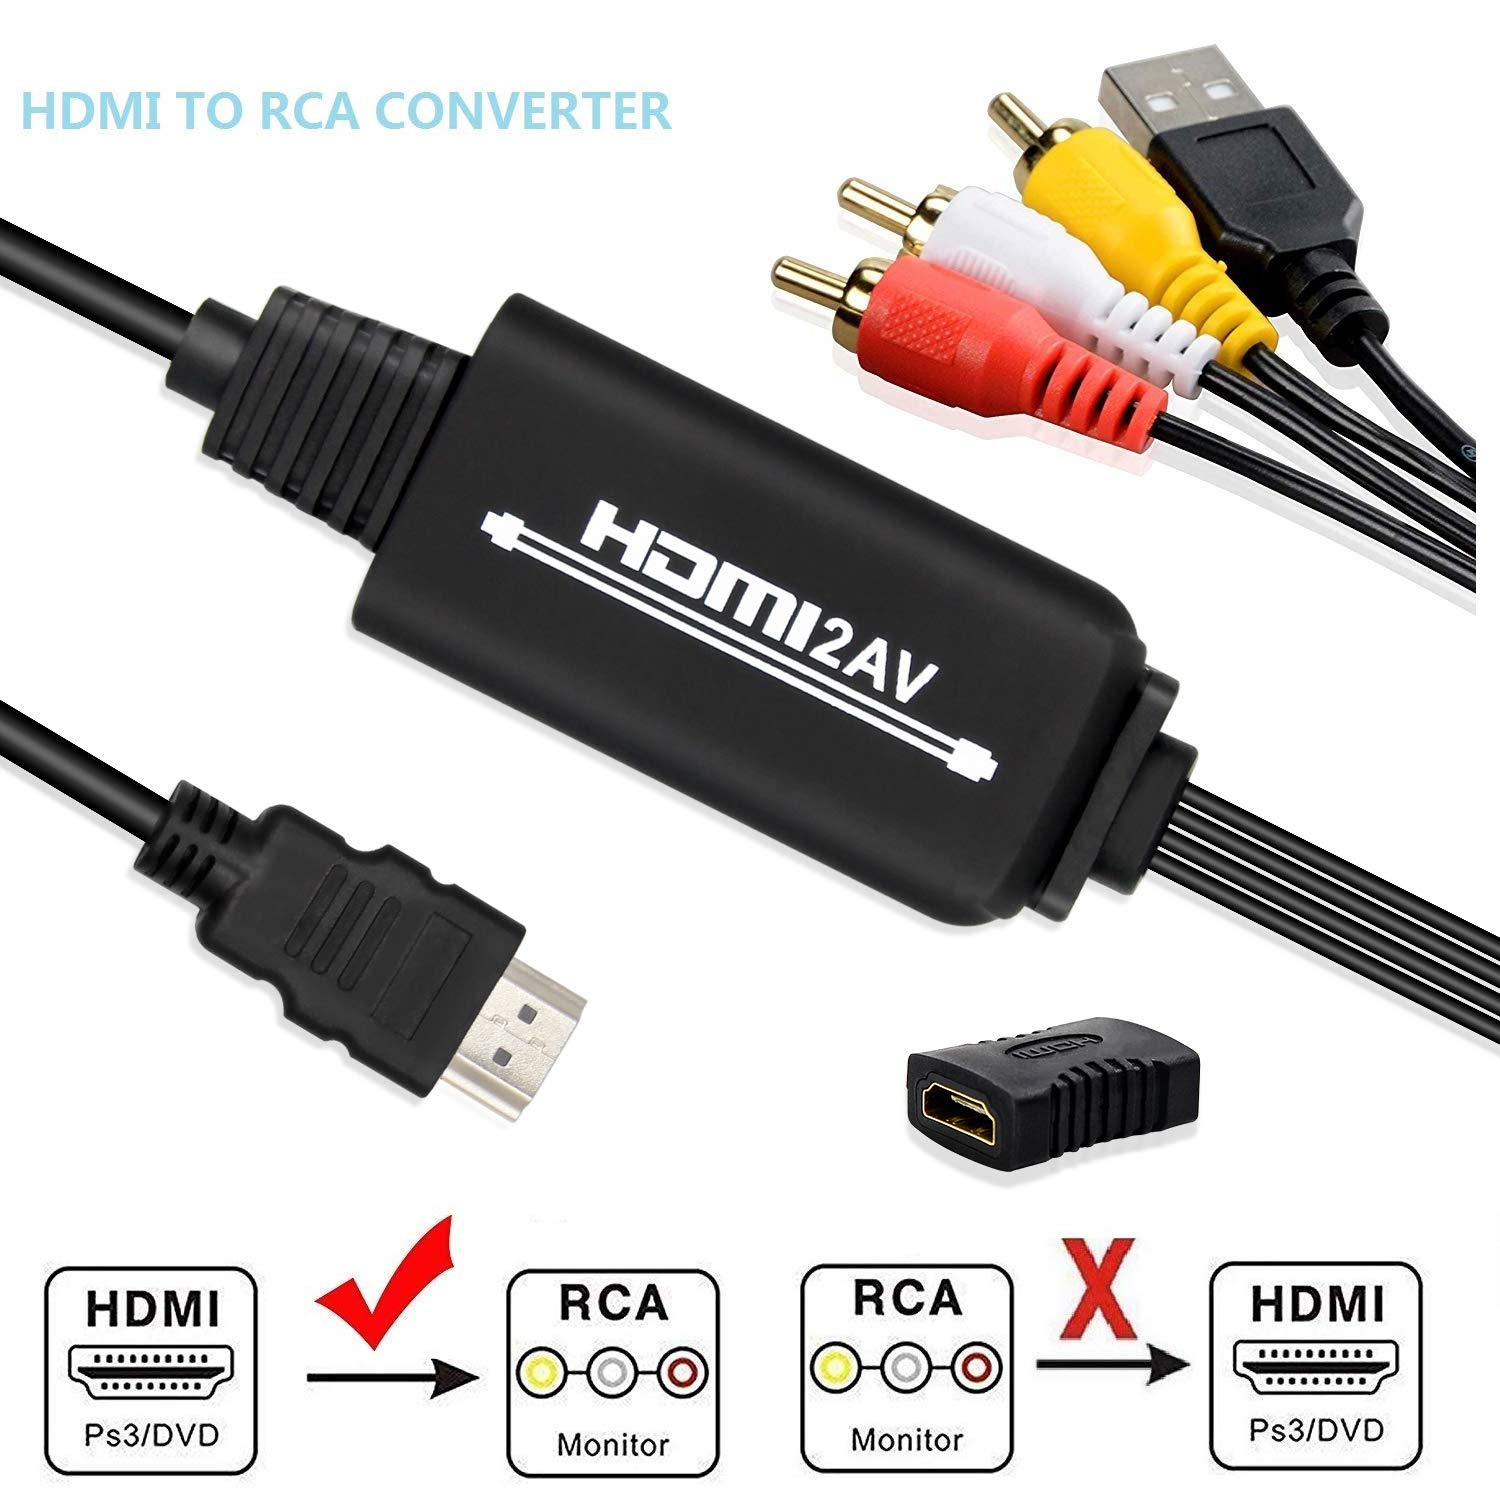 HDMI to RCA Converter - UBISHENG 1080P HDMI to AV CVBS Composite Converter, Compatible with PC/Laptop/HDTV/DVD / PS3 / PS4 Blu Ray Player STB etc, Support PAL/NTSC.